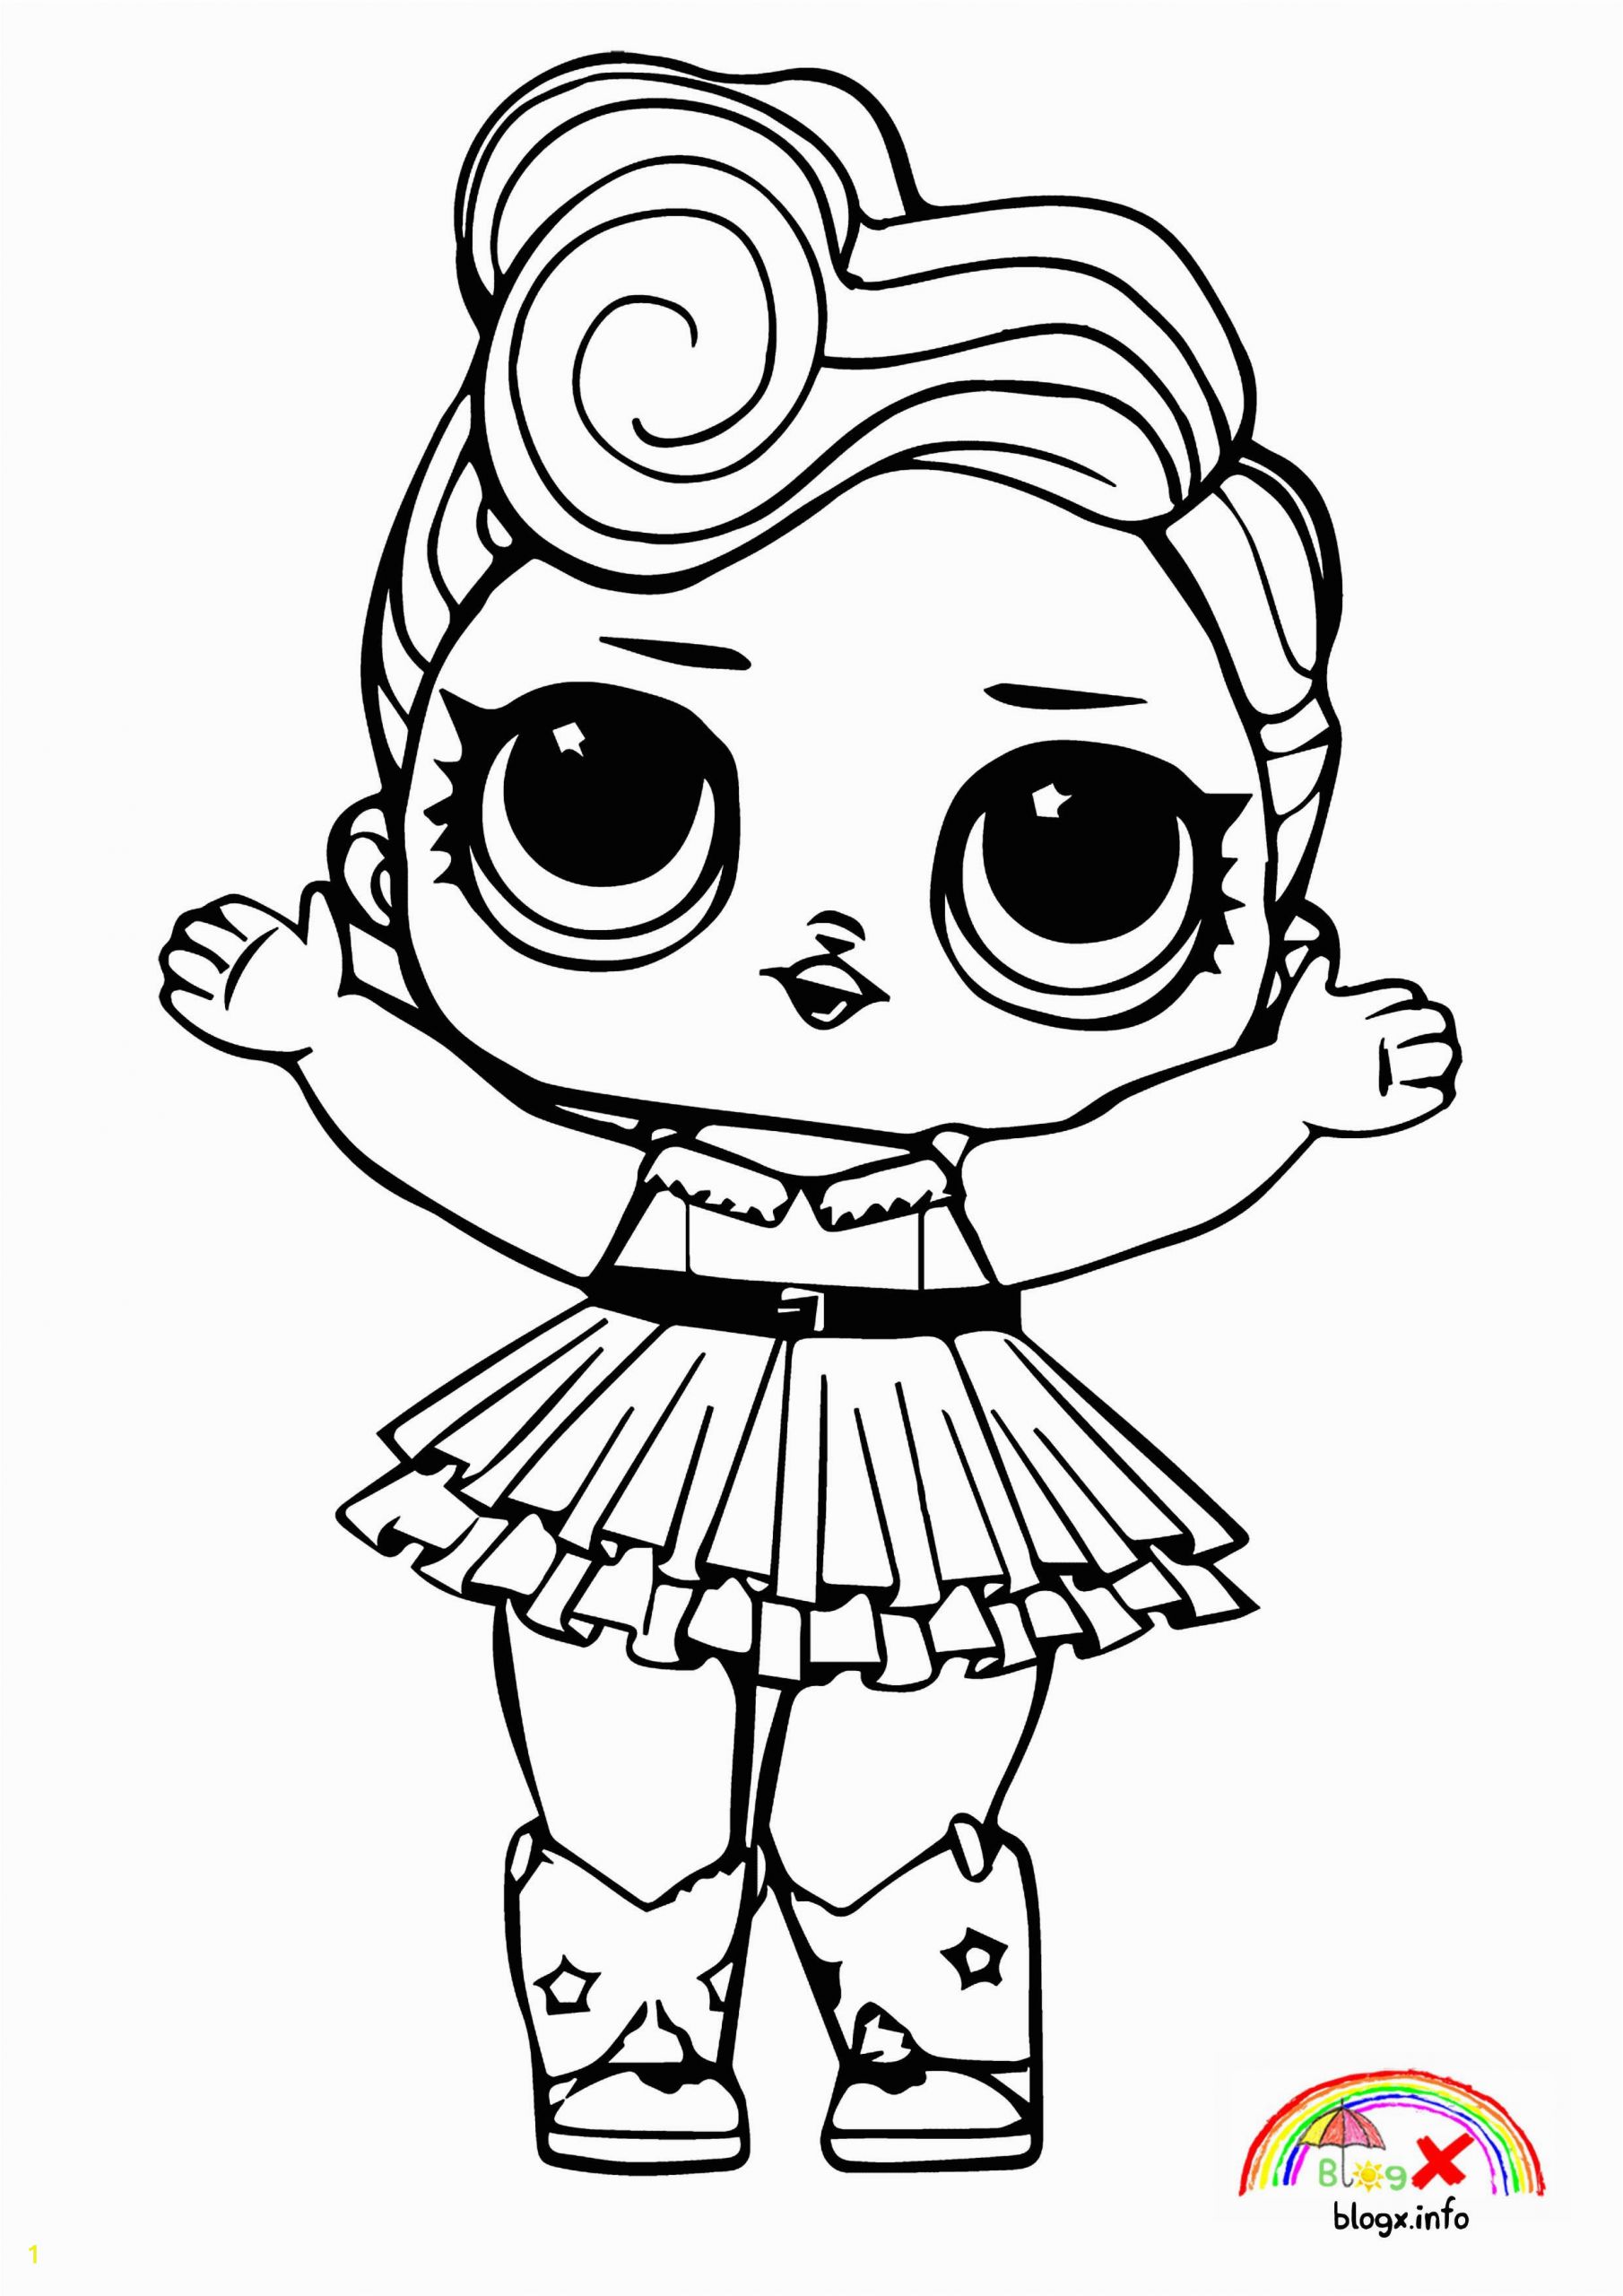 Lol Coloring Pages for Kids Lol Surprise Dolls Coloring Book Hd